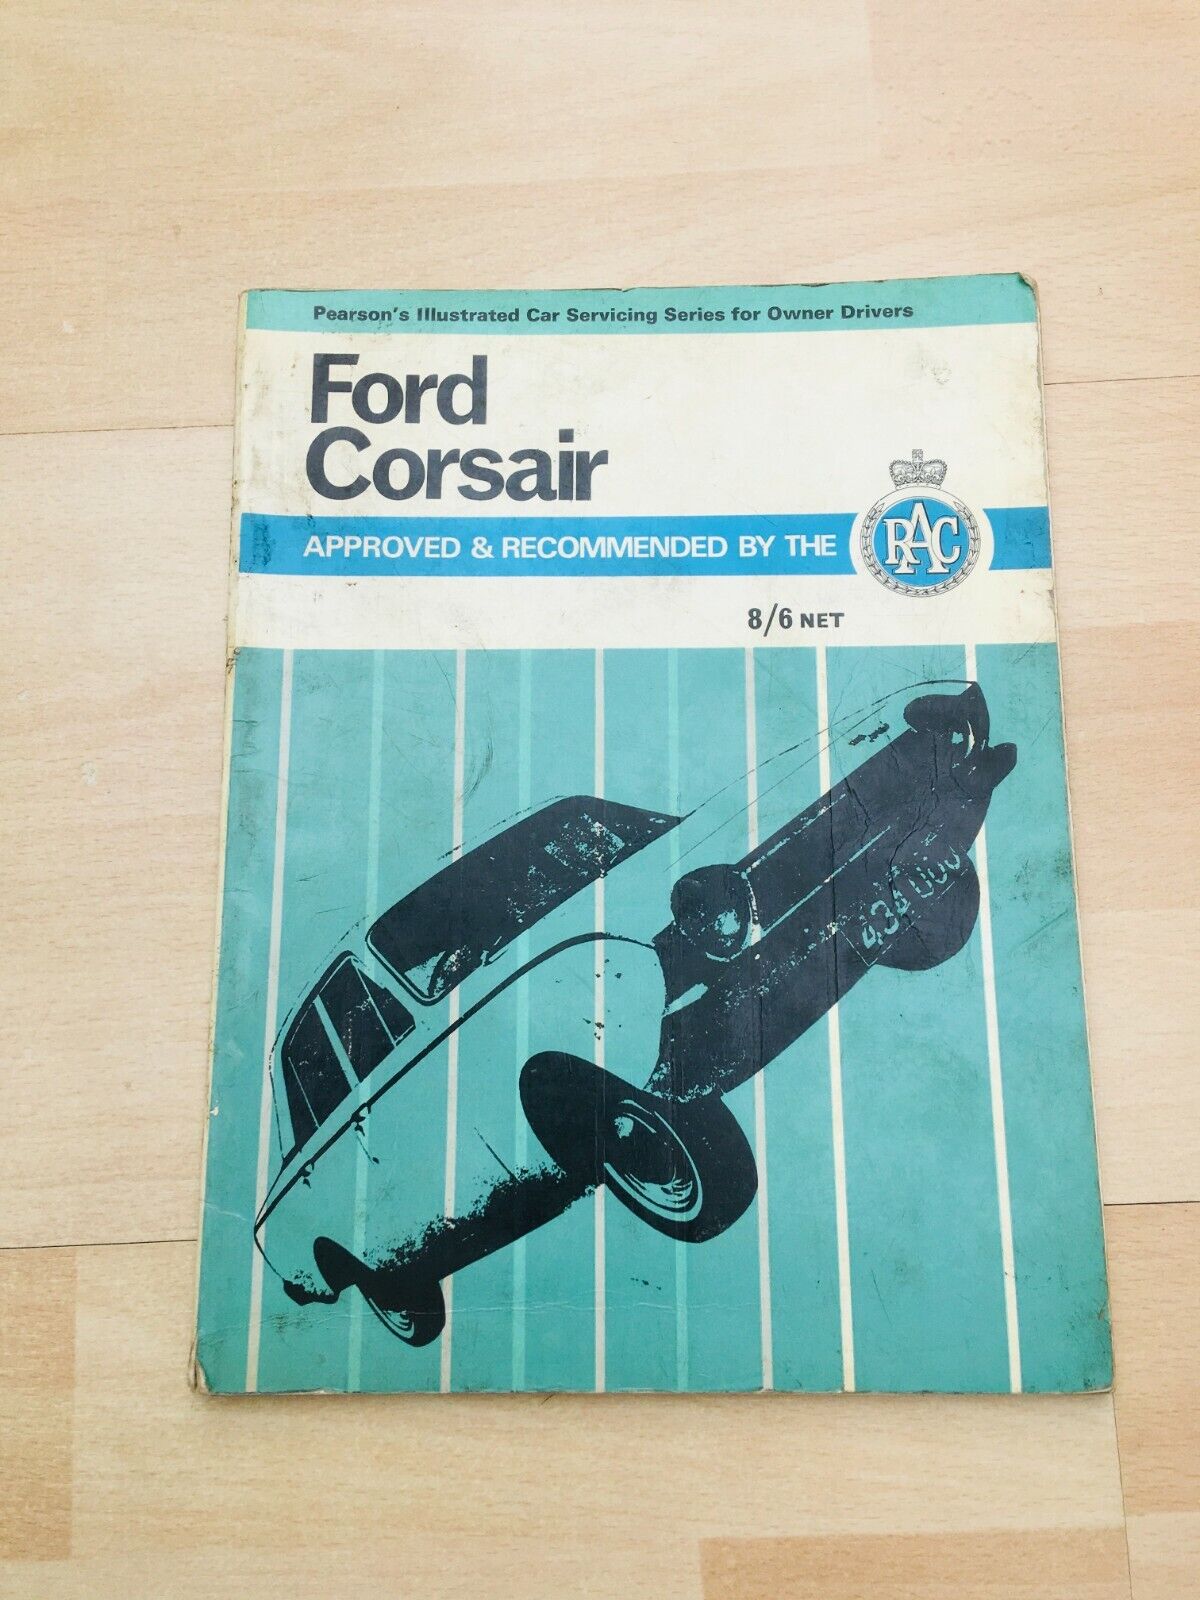 Ford Corsair Owner Drivers Illustrated Car 1968 Sale price Classic Book Service